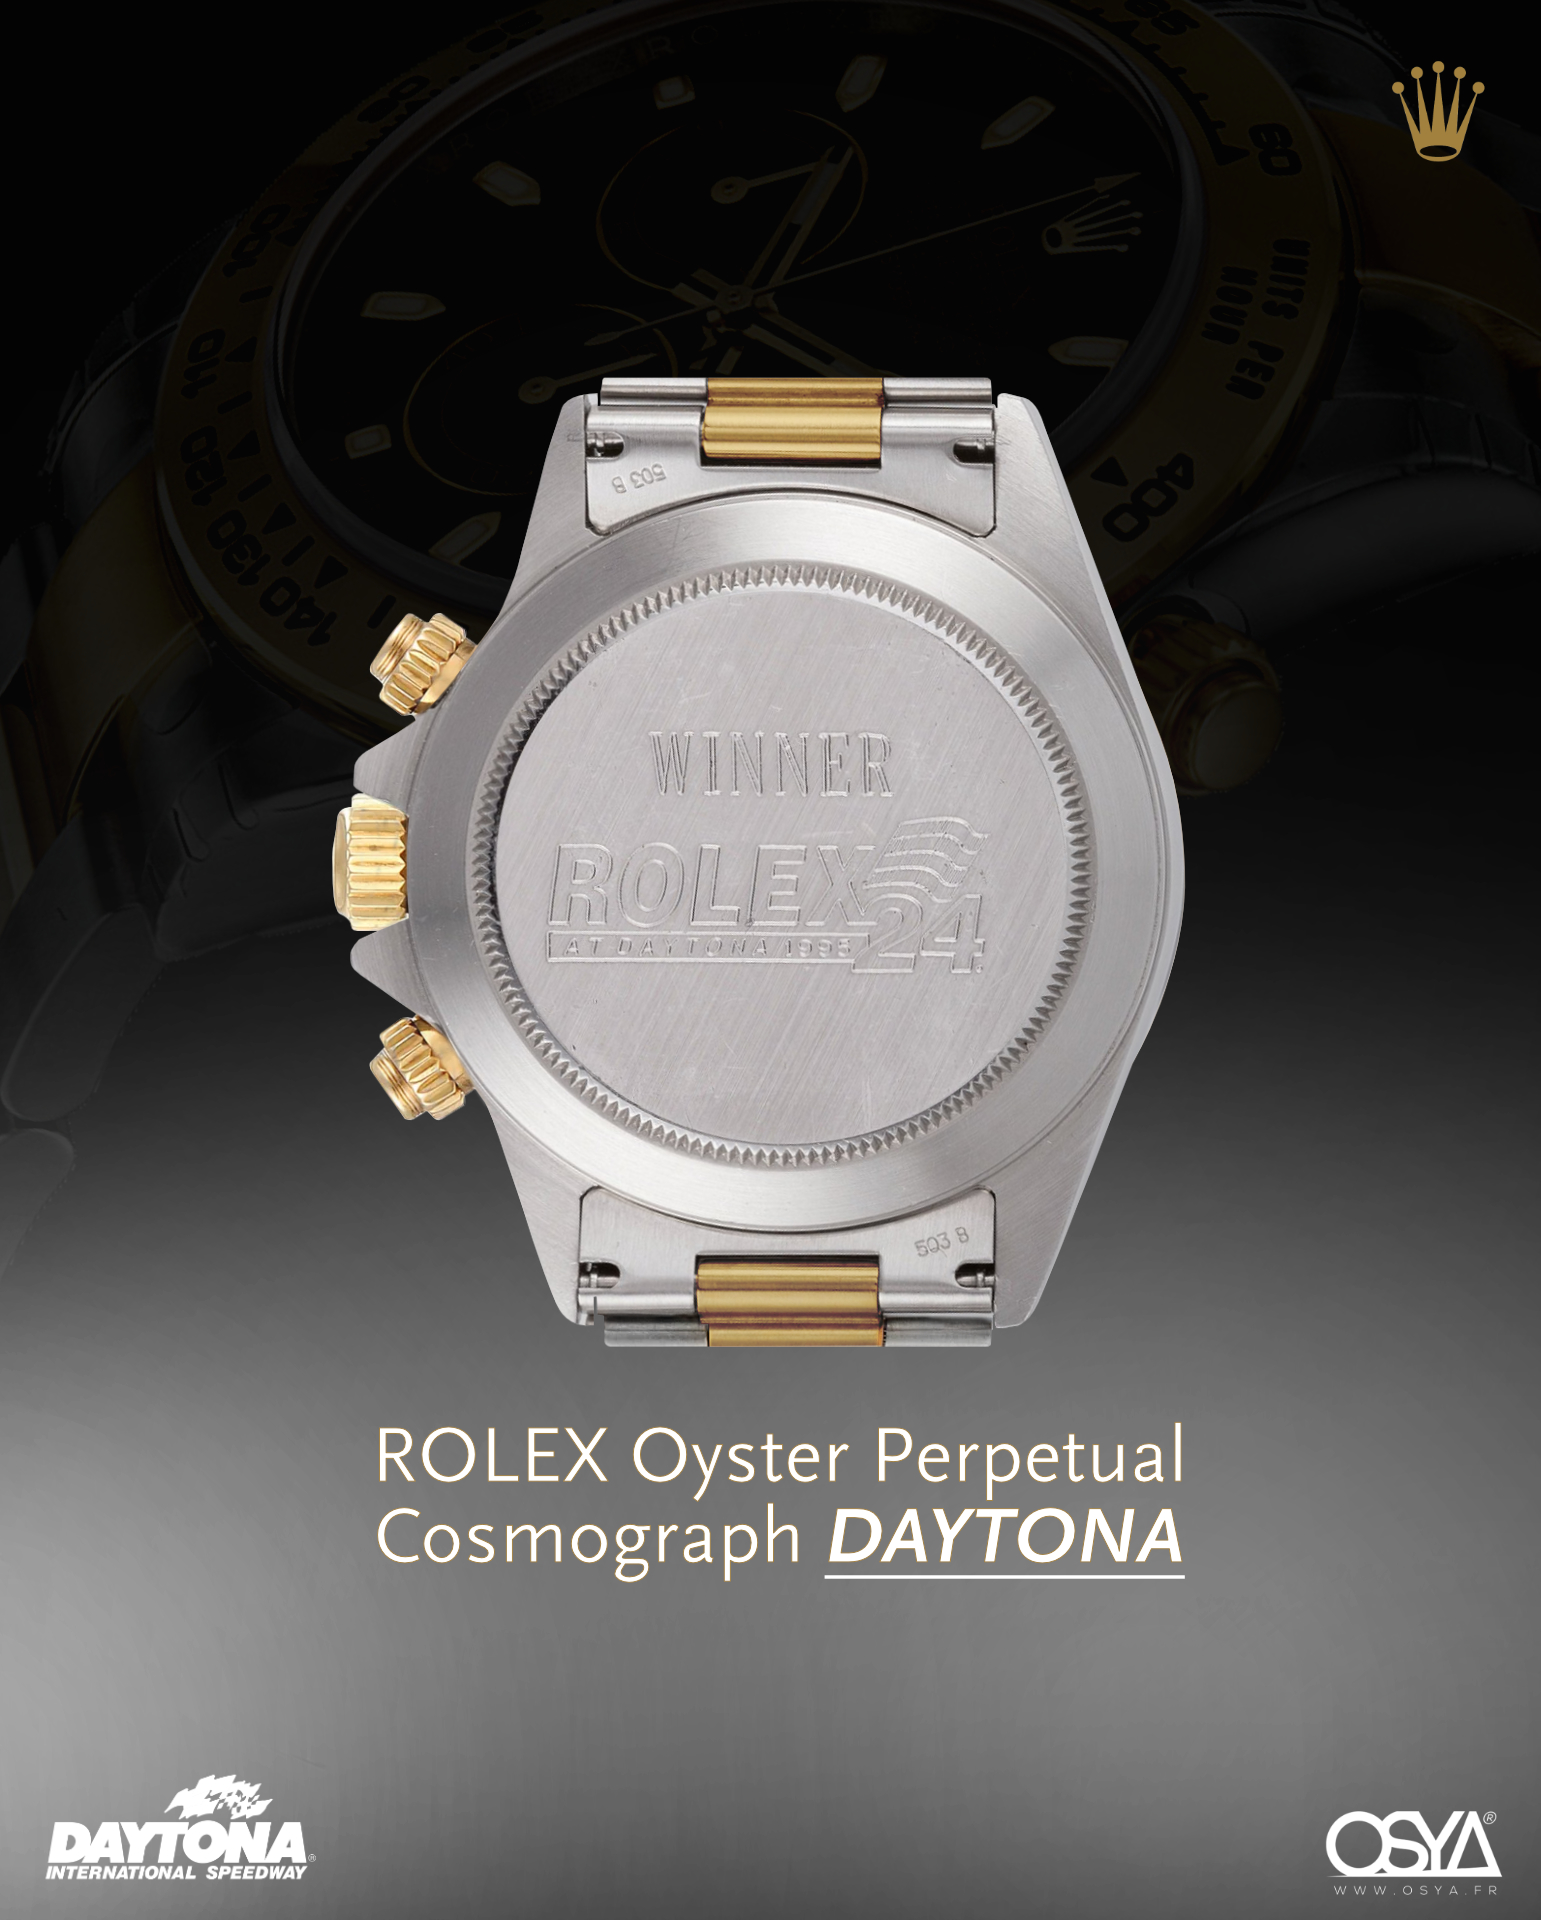 Winner 1995 AT DAYTONA sur  ROLEX Oyster Perpetual Cosmograph